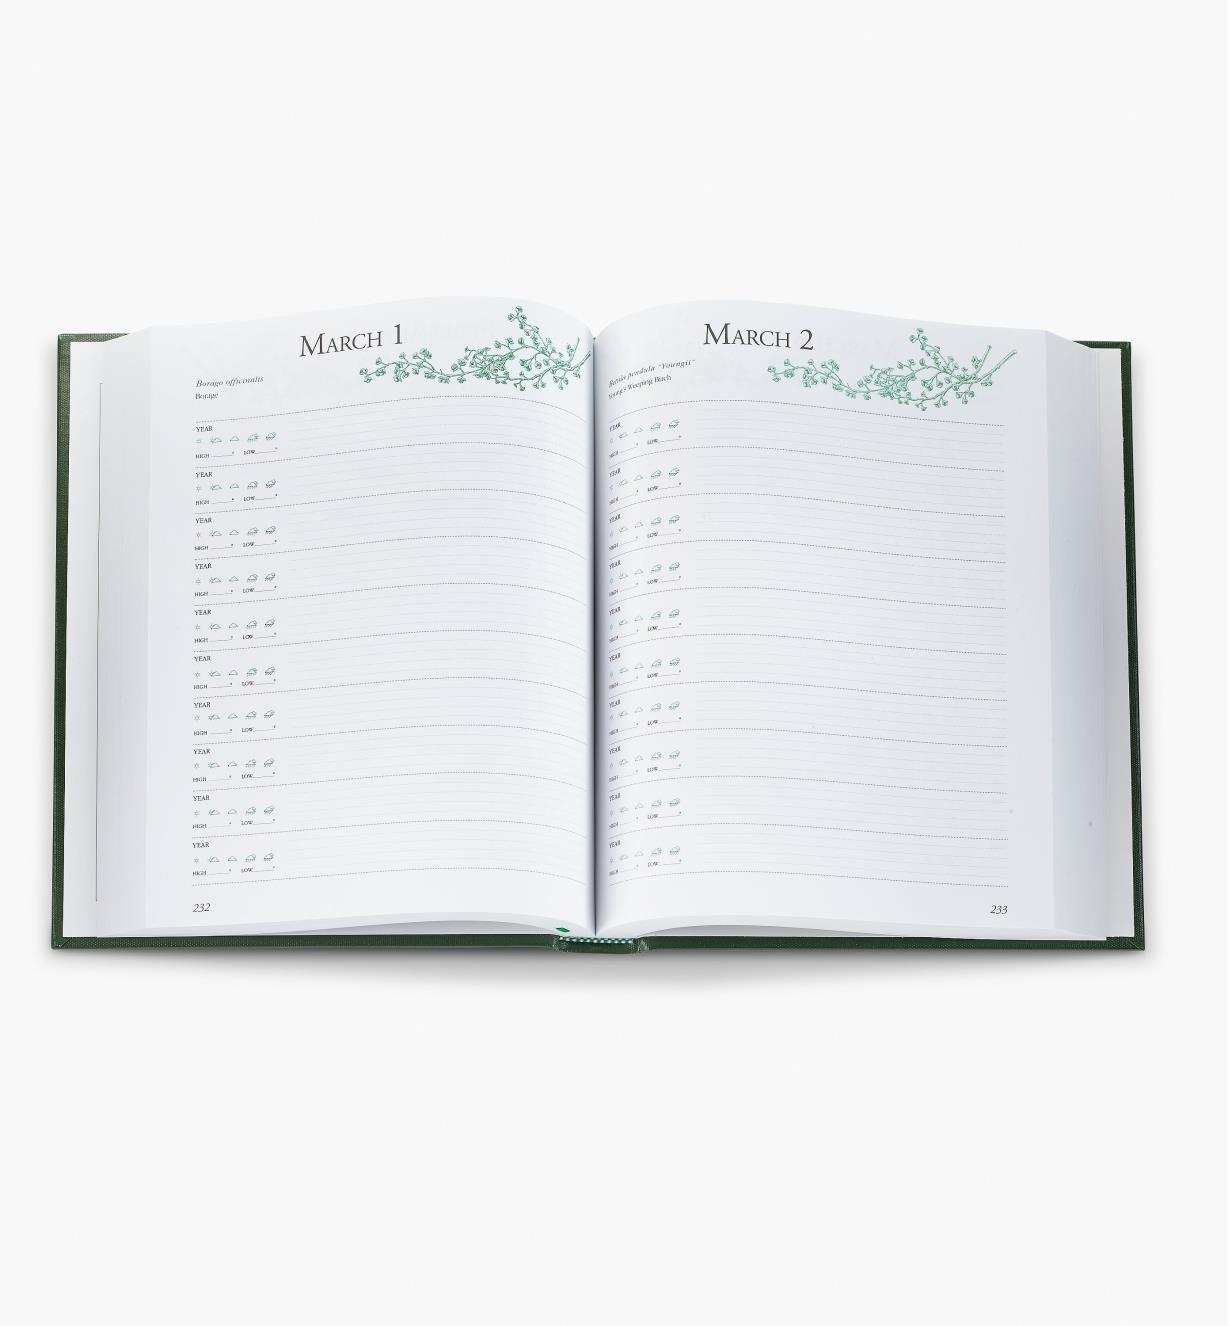 A Gardener's Journal opened to a diary spread